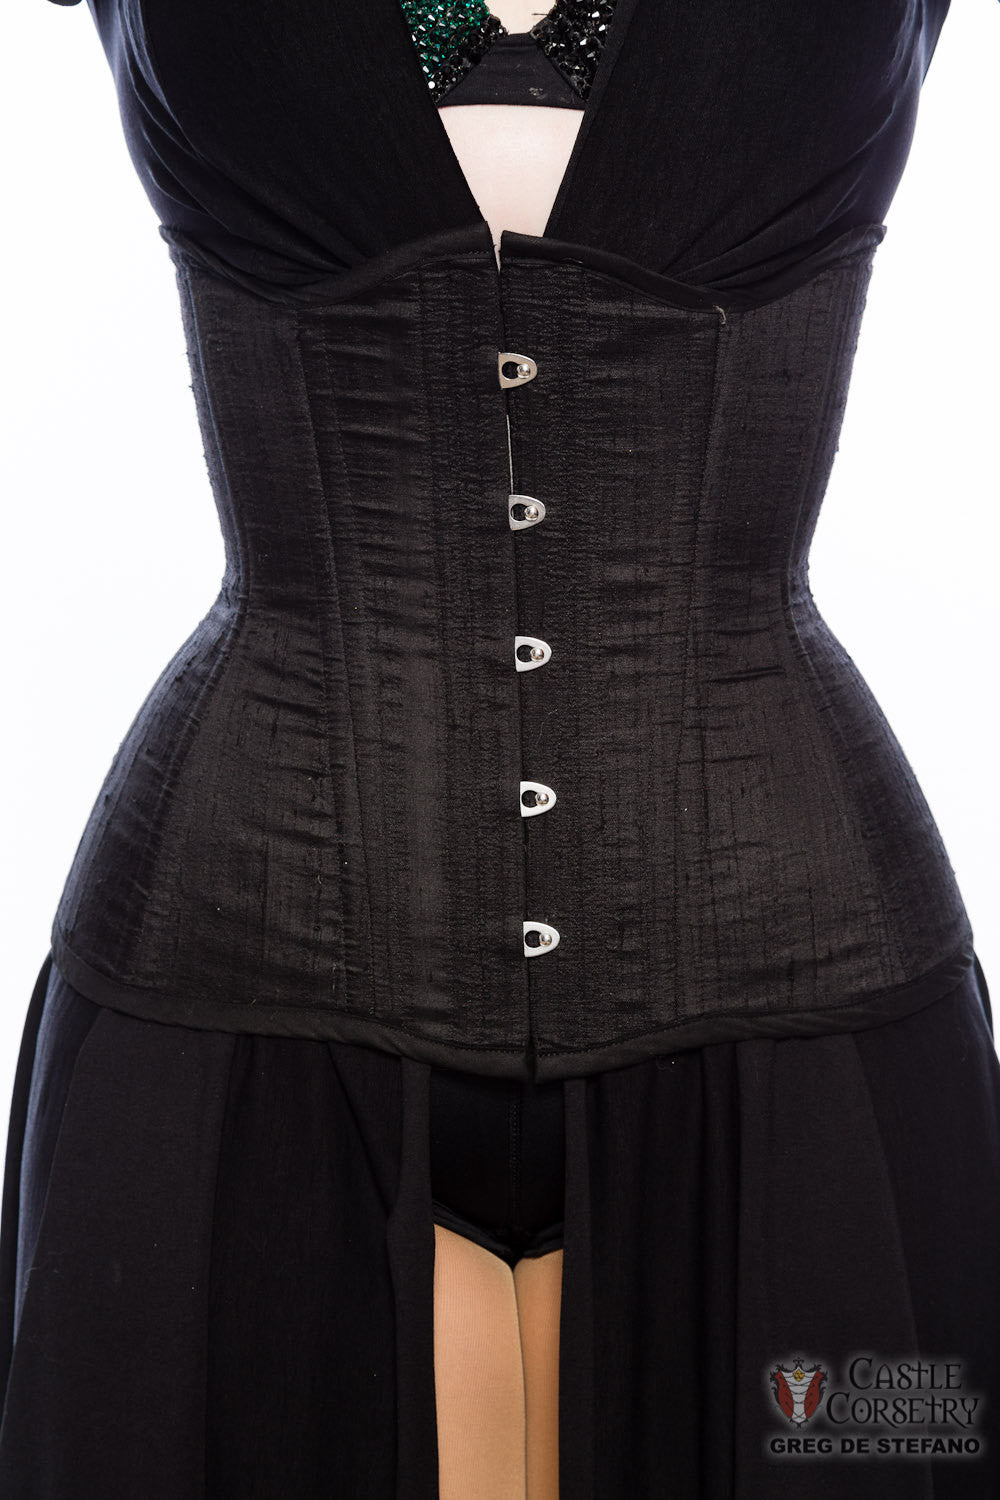 This Time You Can Choose Your Own Waist Training Black Corset